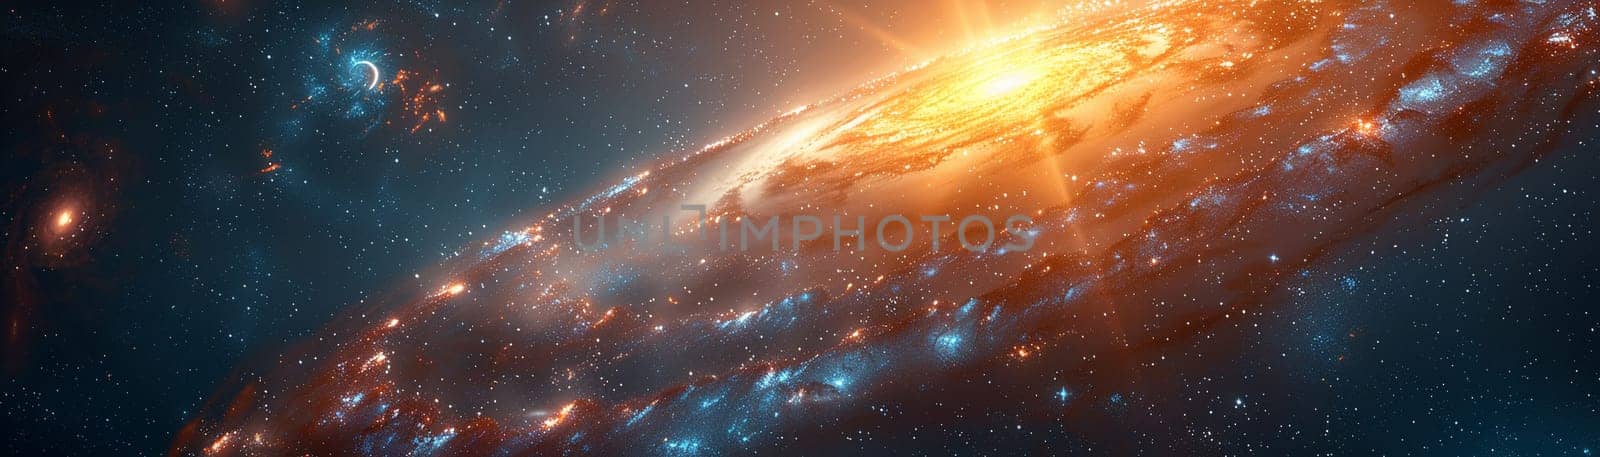 Spiral galaxy illustration by Benzoix